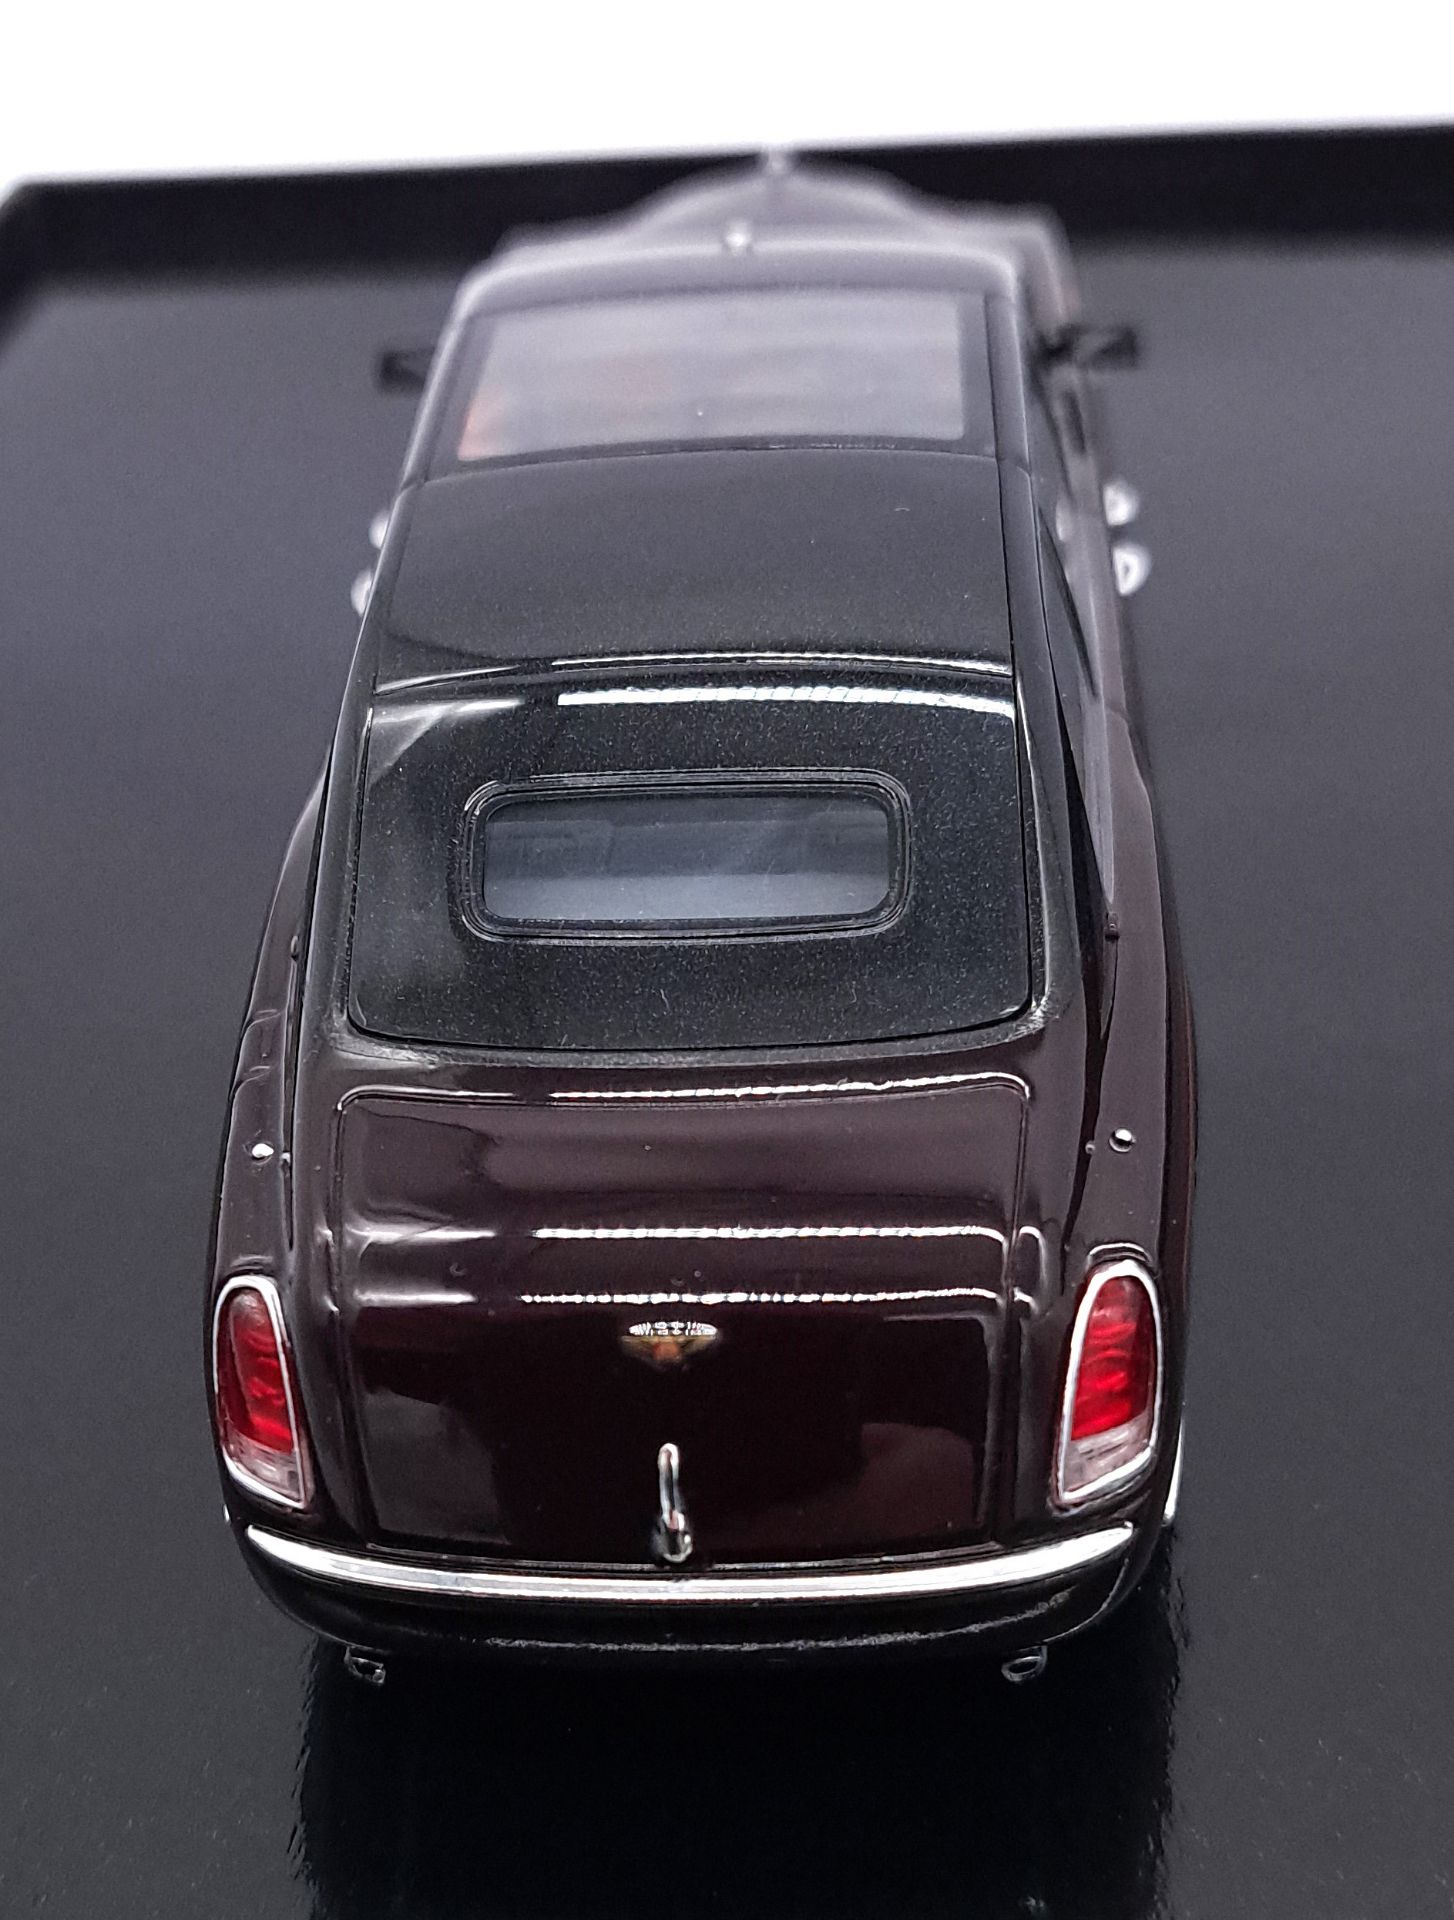 Minichamps 1/43rd scale Bentley State Limousine - Image 5 of 6